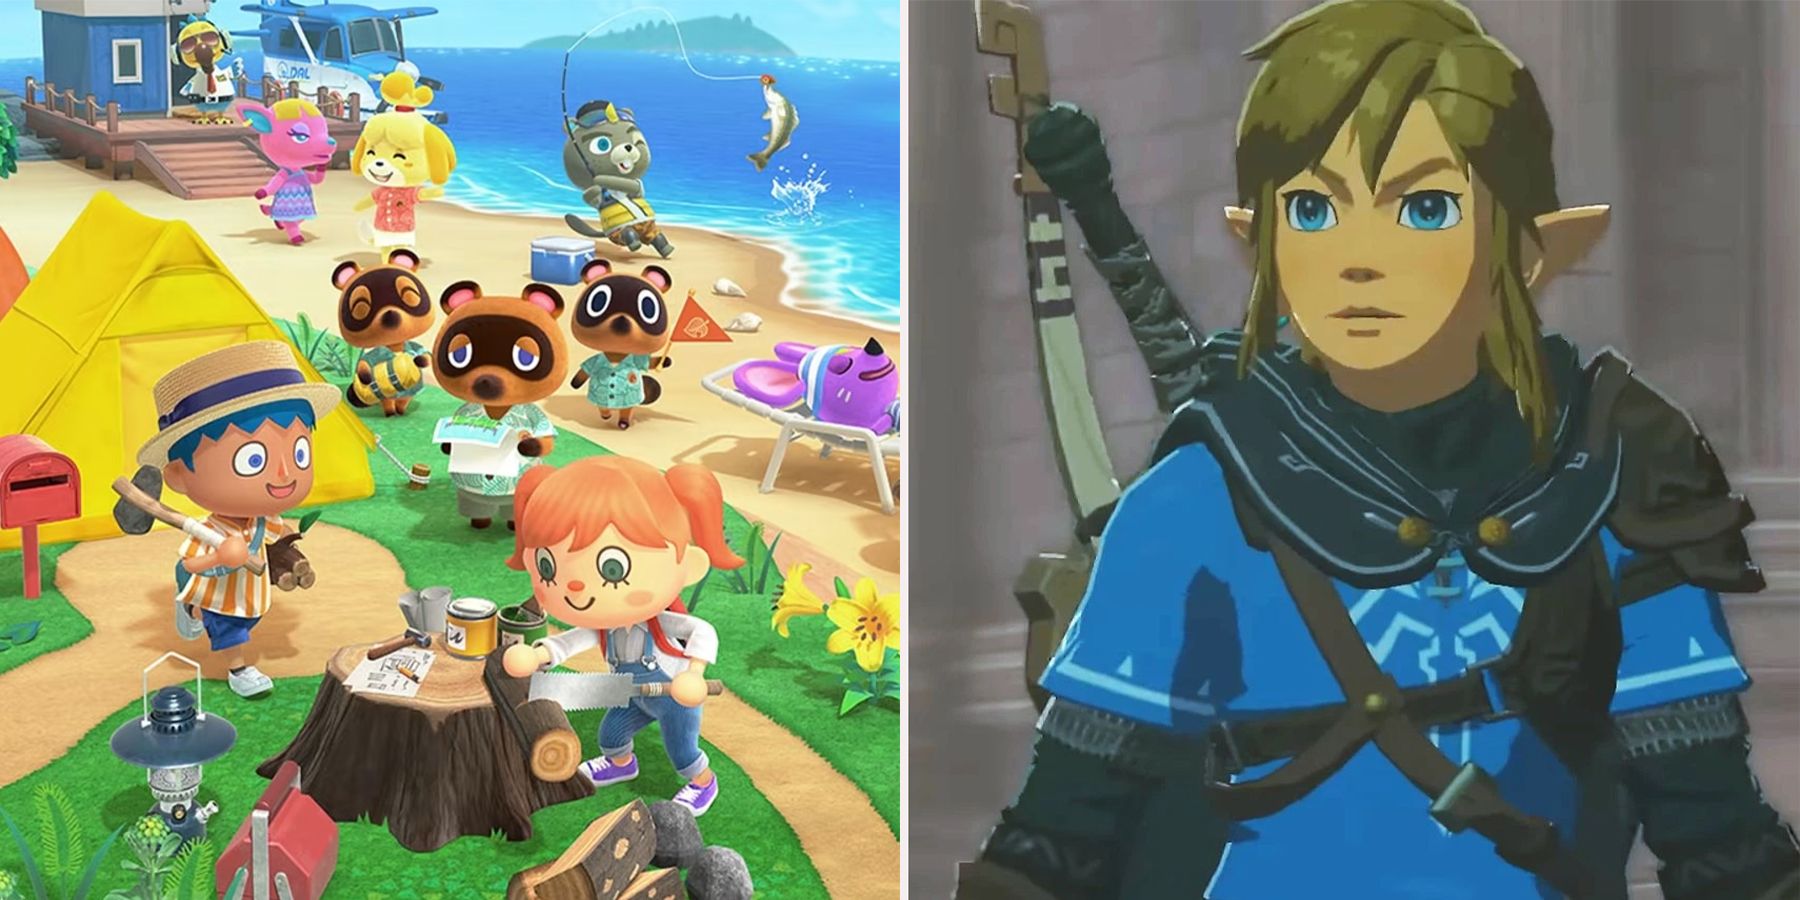 The Next Zelda Game Needs To Bring Back The Series' Best Tradition